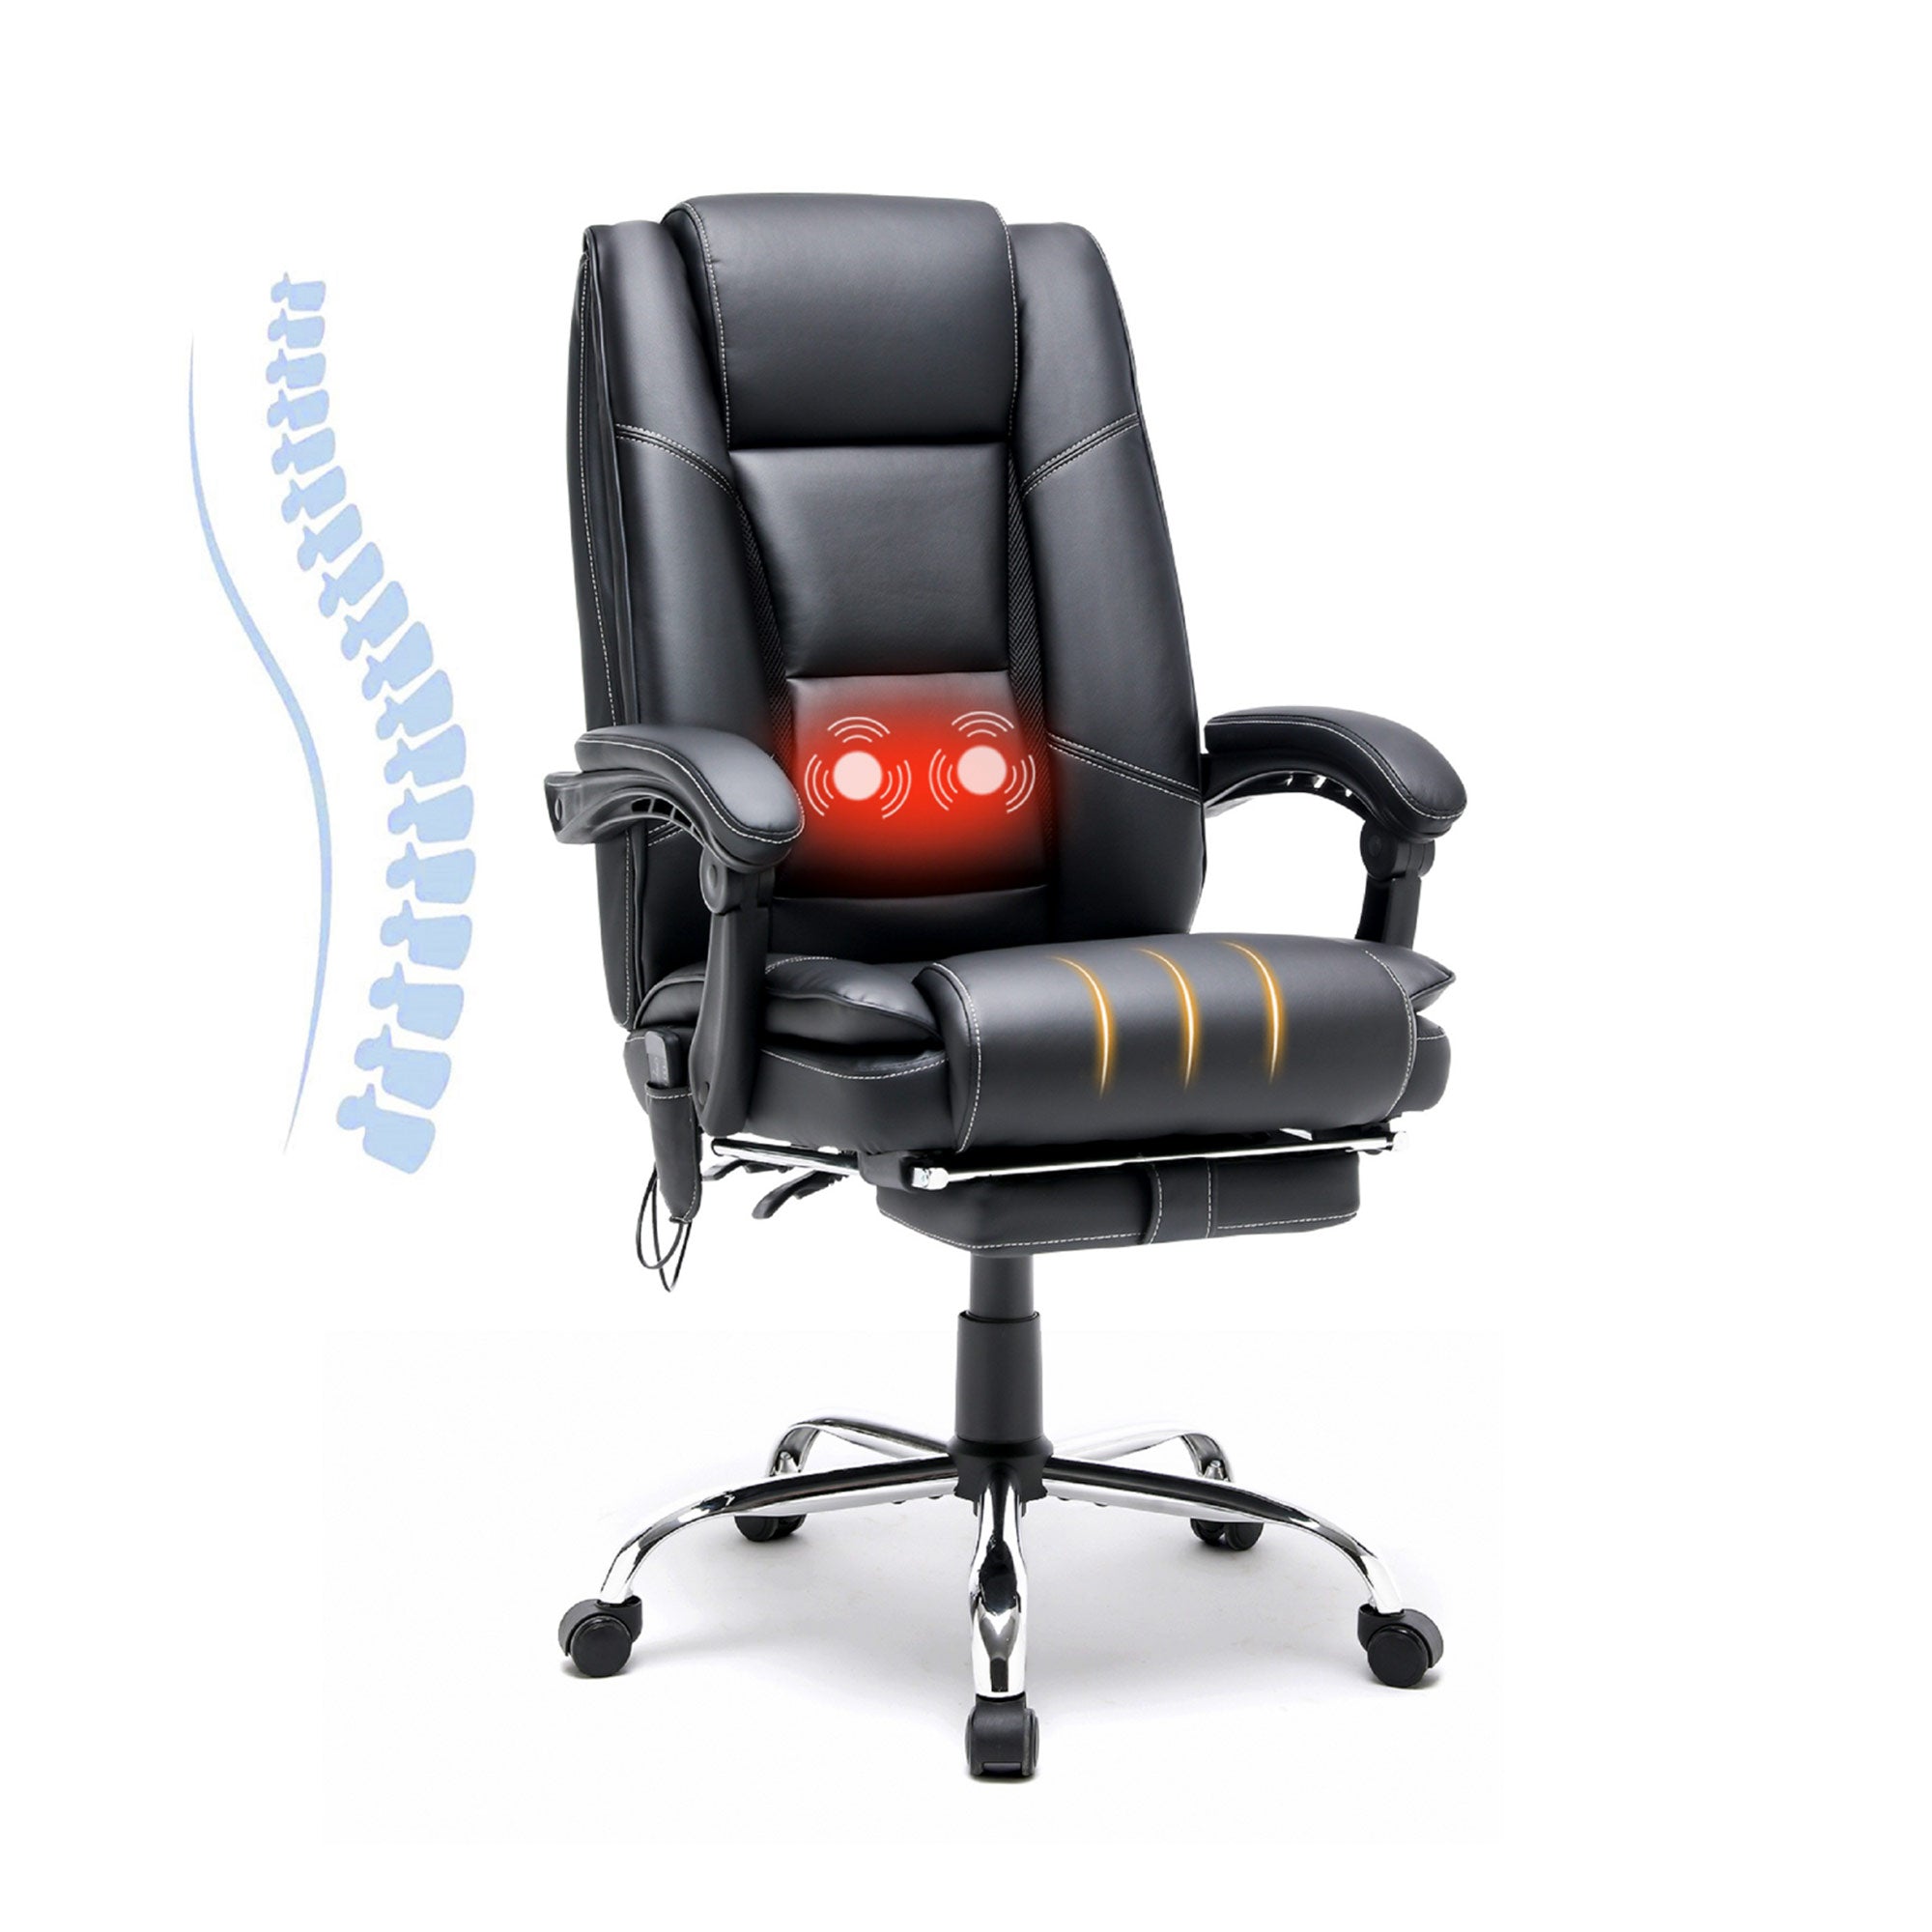 X-Chair X-Tech Executive review: The most comfortable (and most expensive) office  chair I've ever used